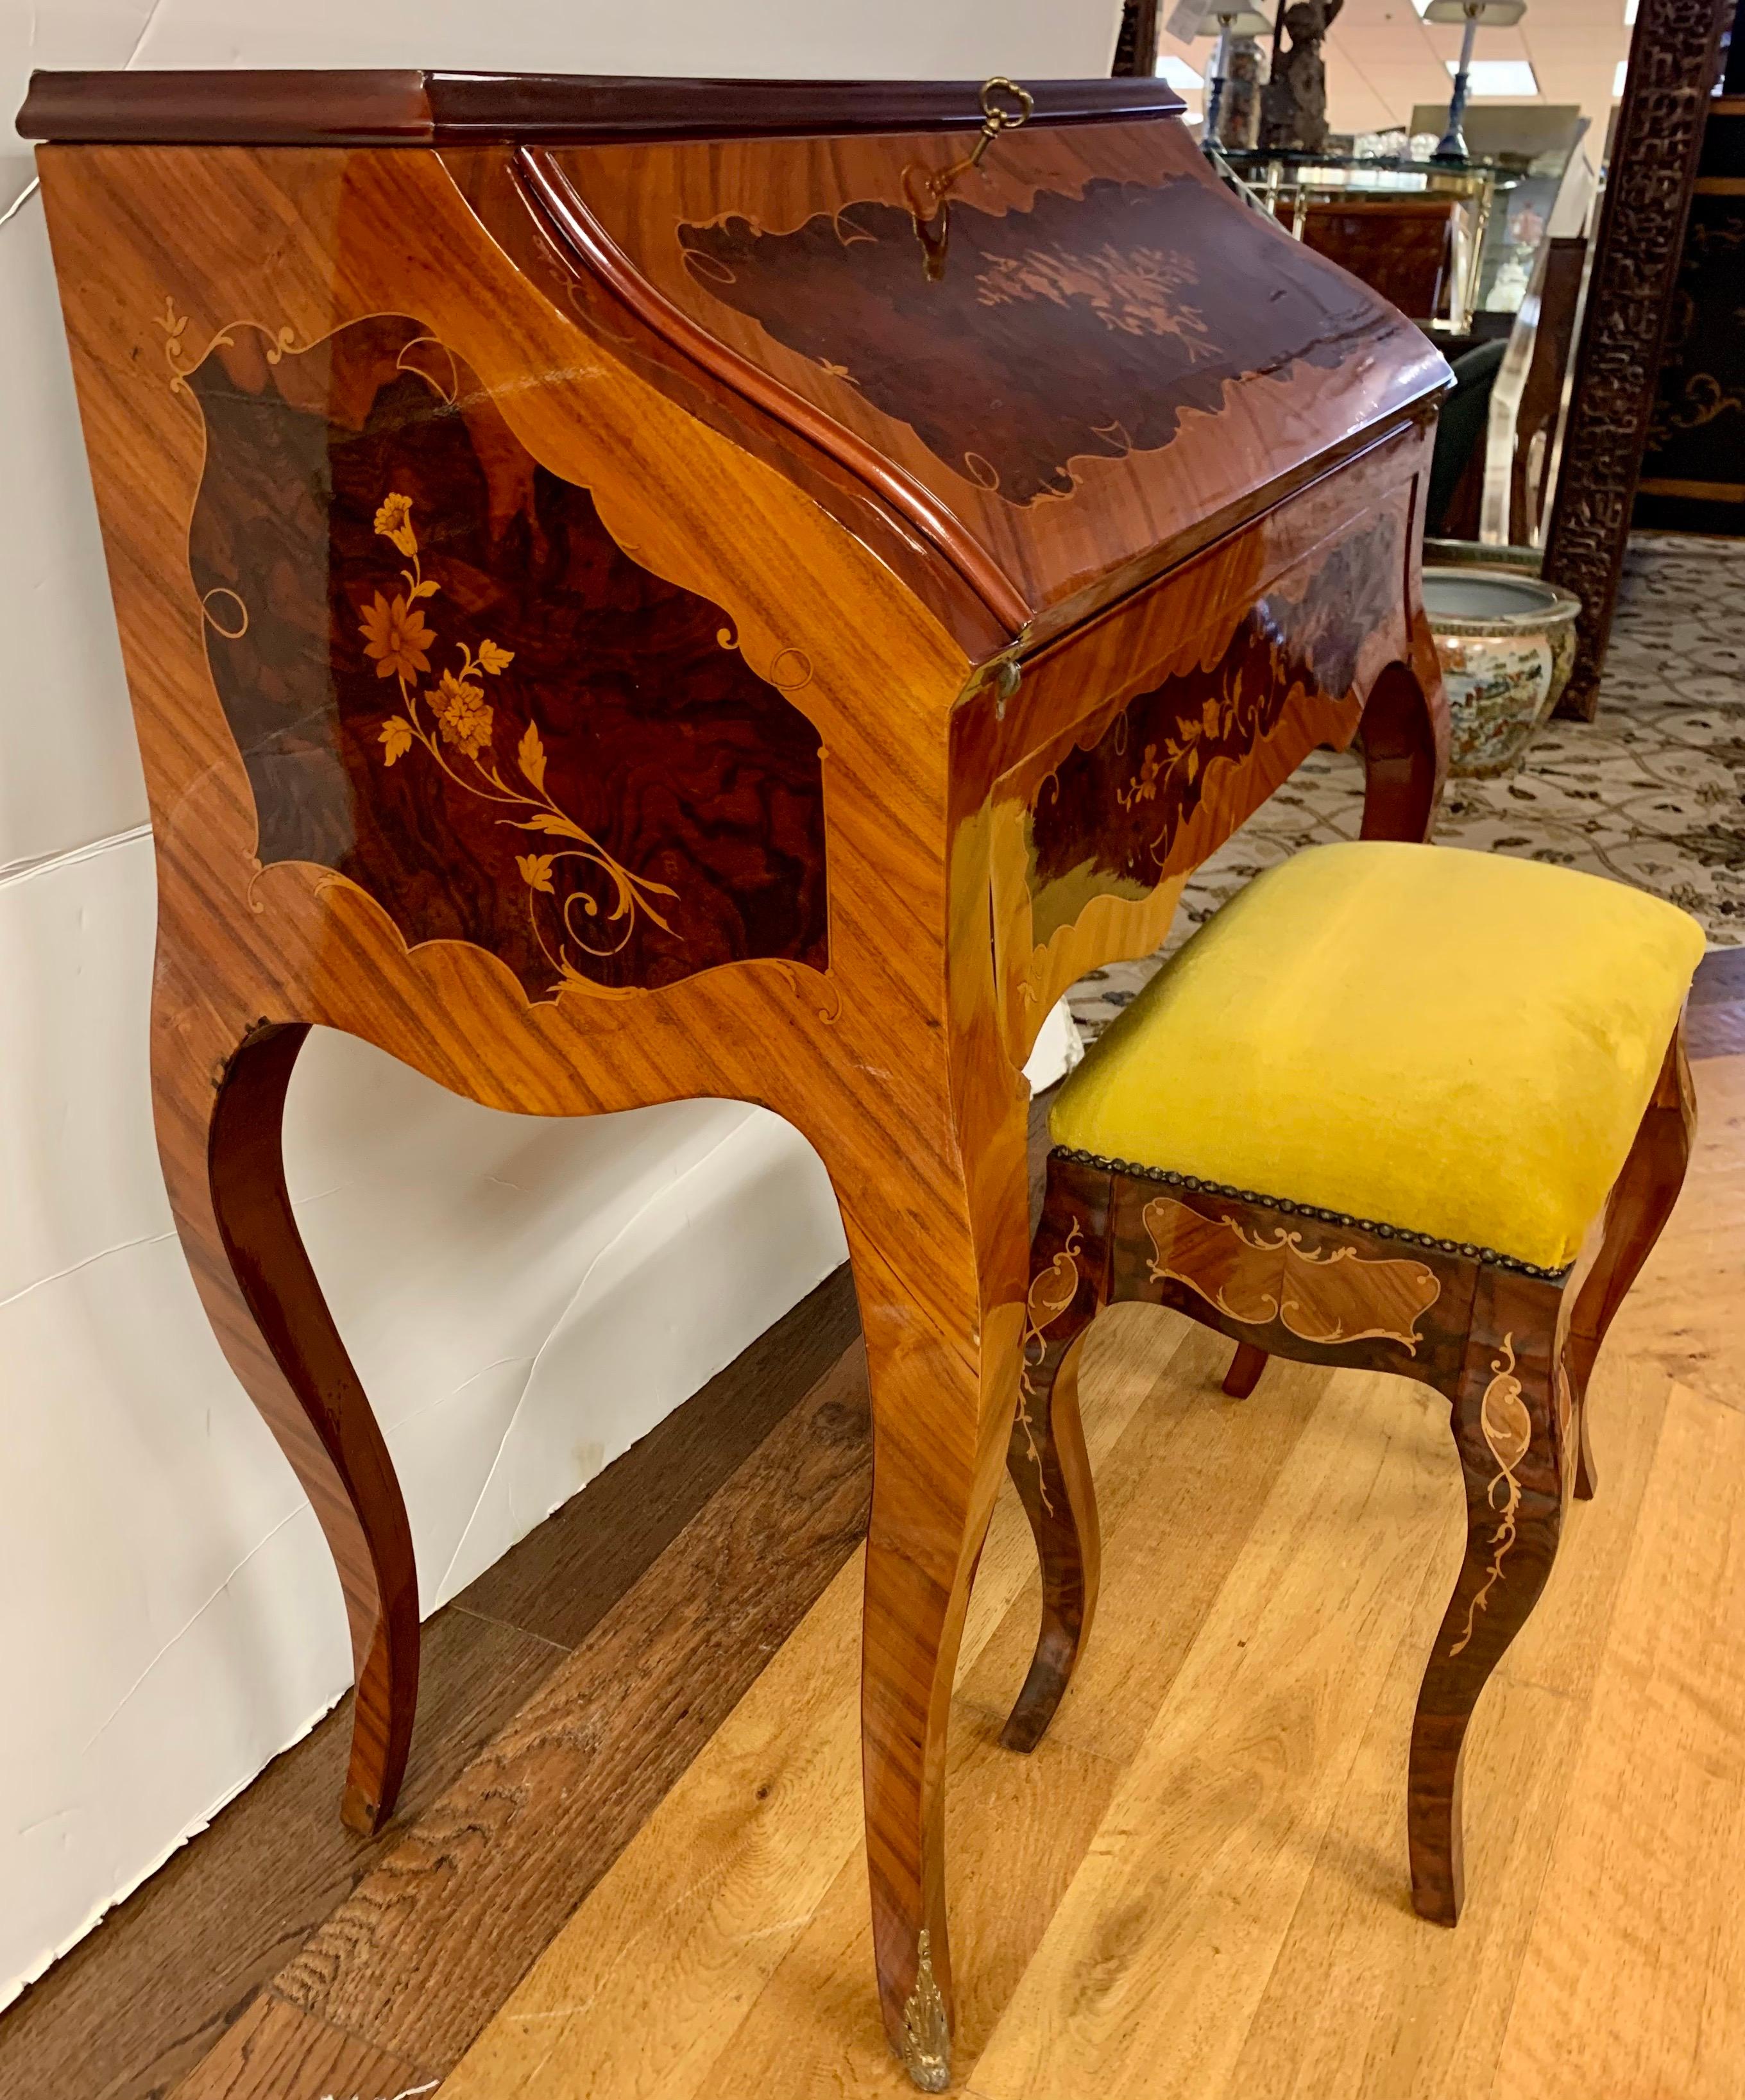 Gorgeous French writing desk in kingwood with intricate marquetry inlay work on all sides, amazing floral motifs and arabesques. Writing surface is revealed via drop down with cubby and three small drawers. Comes with velvet top bench with same